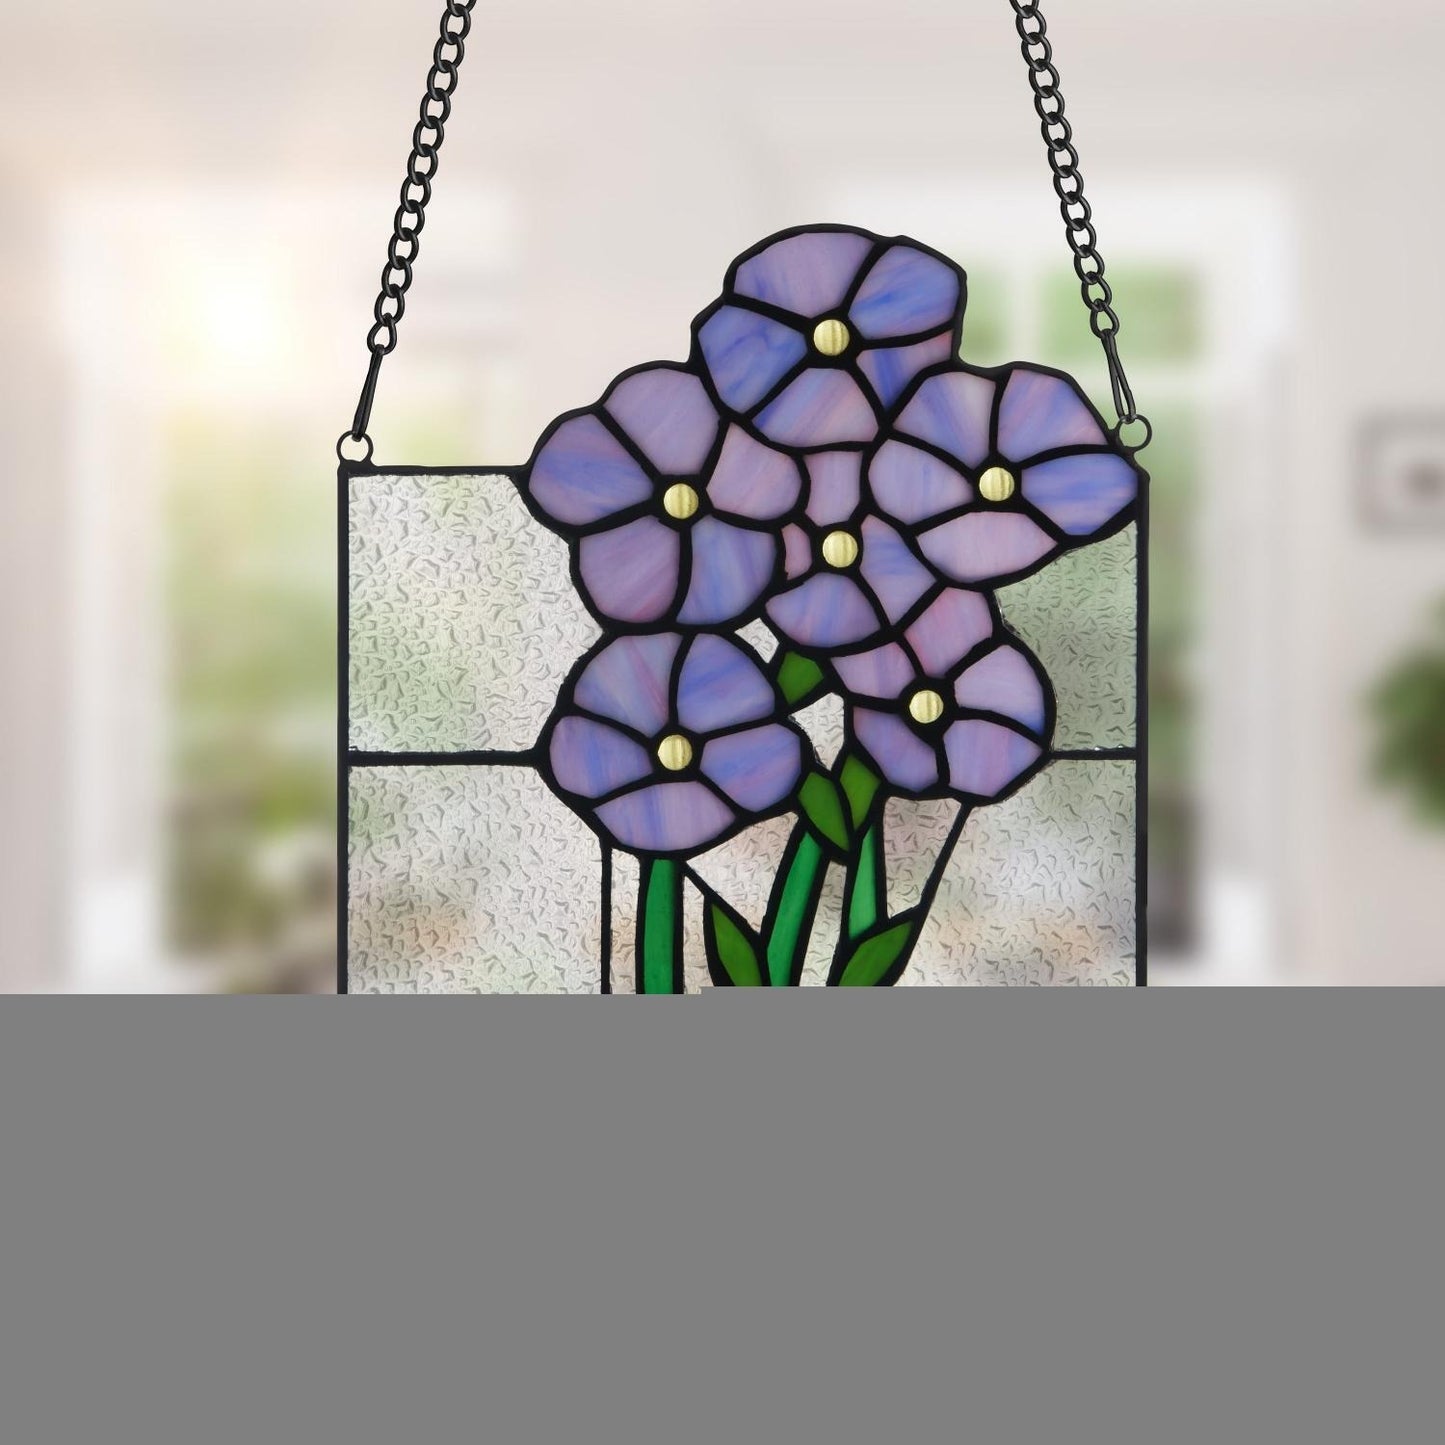 Violets Tiffany Style Stained Glass Hanging Window Panel Suncatcher 7.5x10in